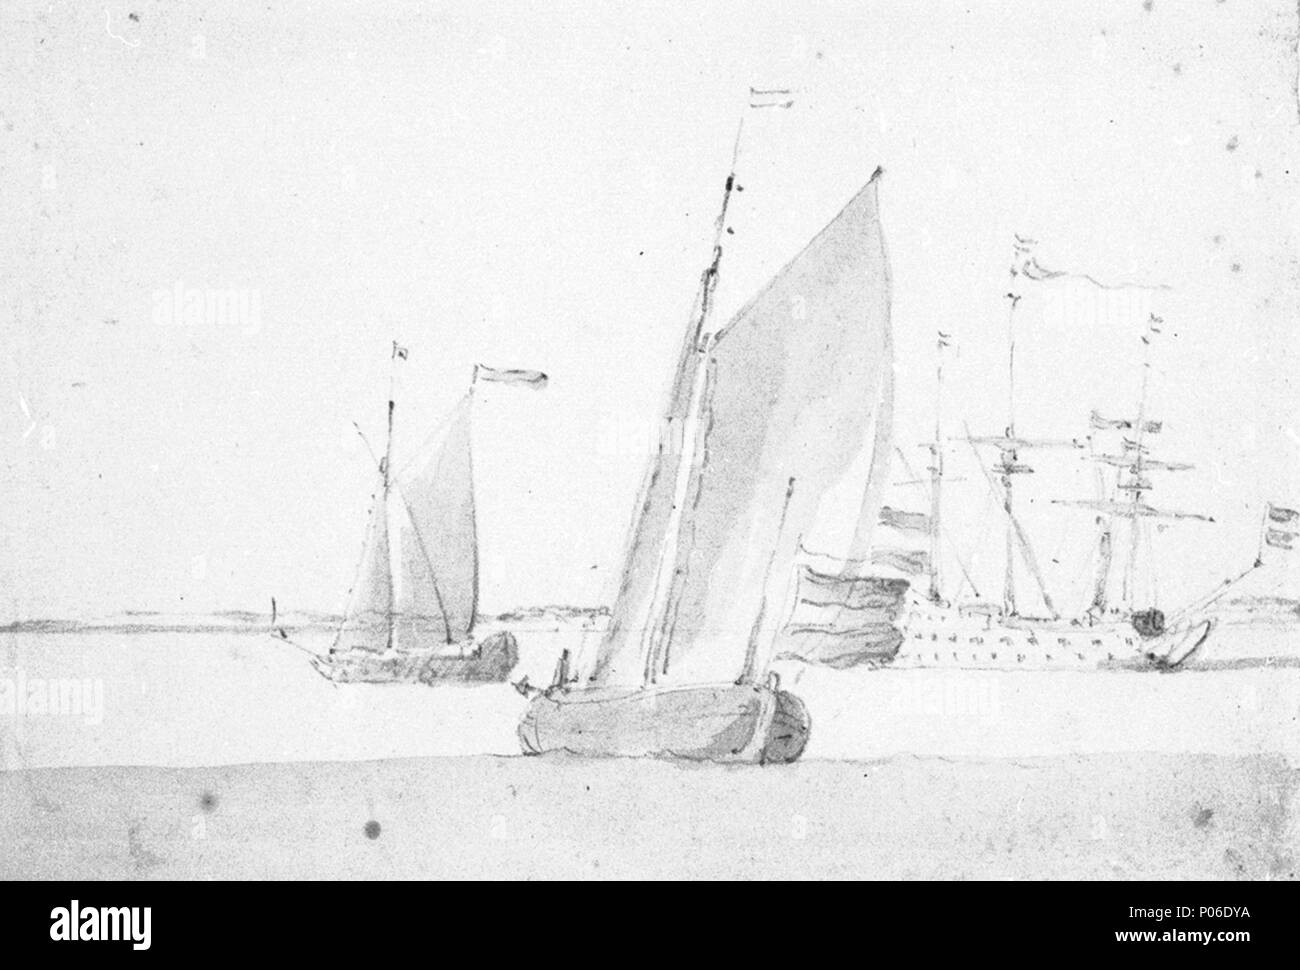 .  English: A galjoot close-hauled A weather quarter view of a galjoot close-hauled on the port tack. A States yacht crossing her bows on the starboard tack. In the right background, a ship is at anchor. Land is depicted in the distance. This is an unsigned pencil and wash drawing by the Elder. A galjoot close-hauled  . circa 1665. Willem Van de Velde, the Elder 102 A galjoot close-hauled RMG PW6791 Stock Photo